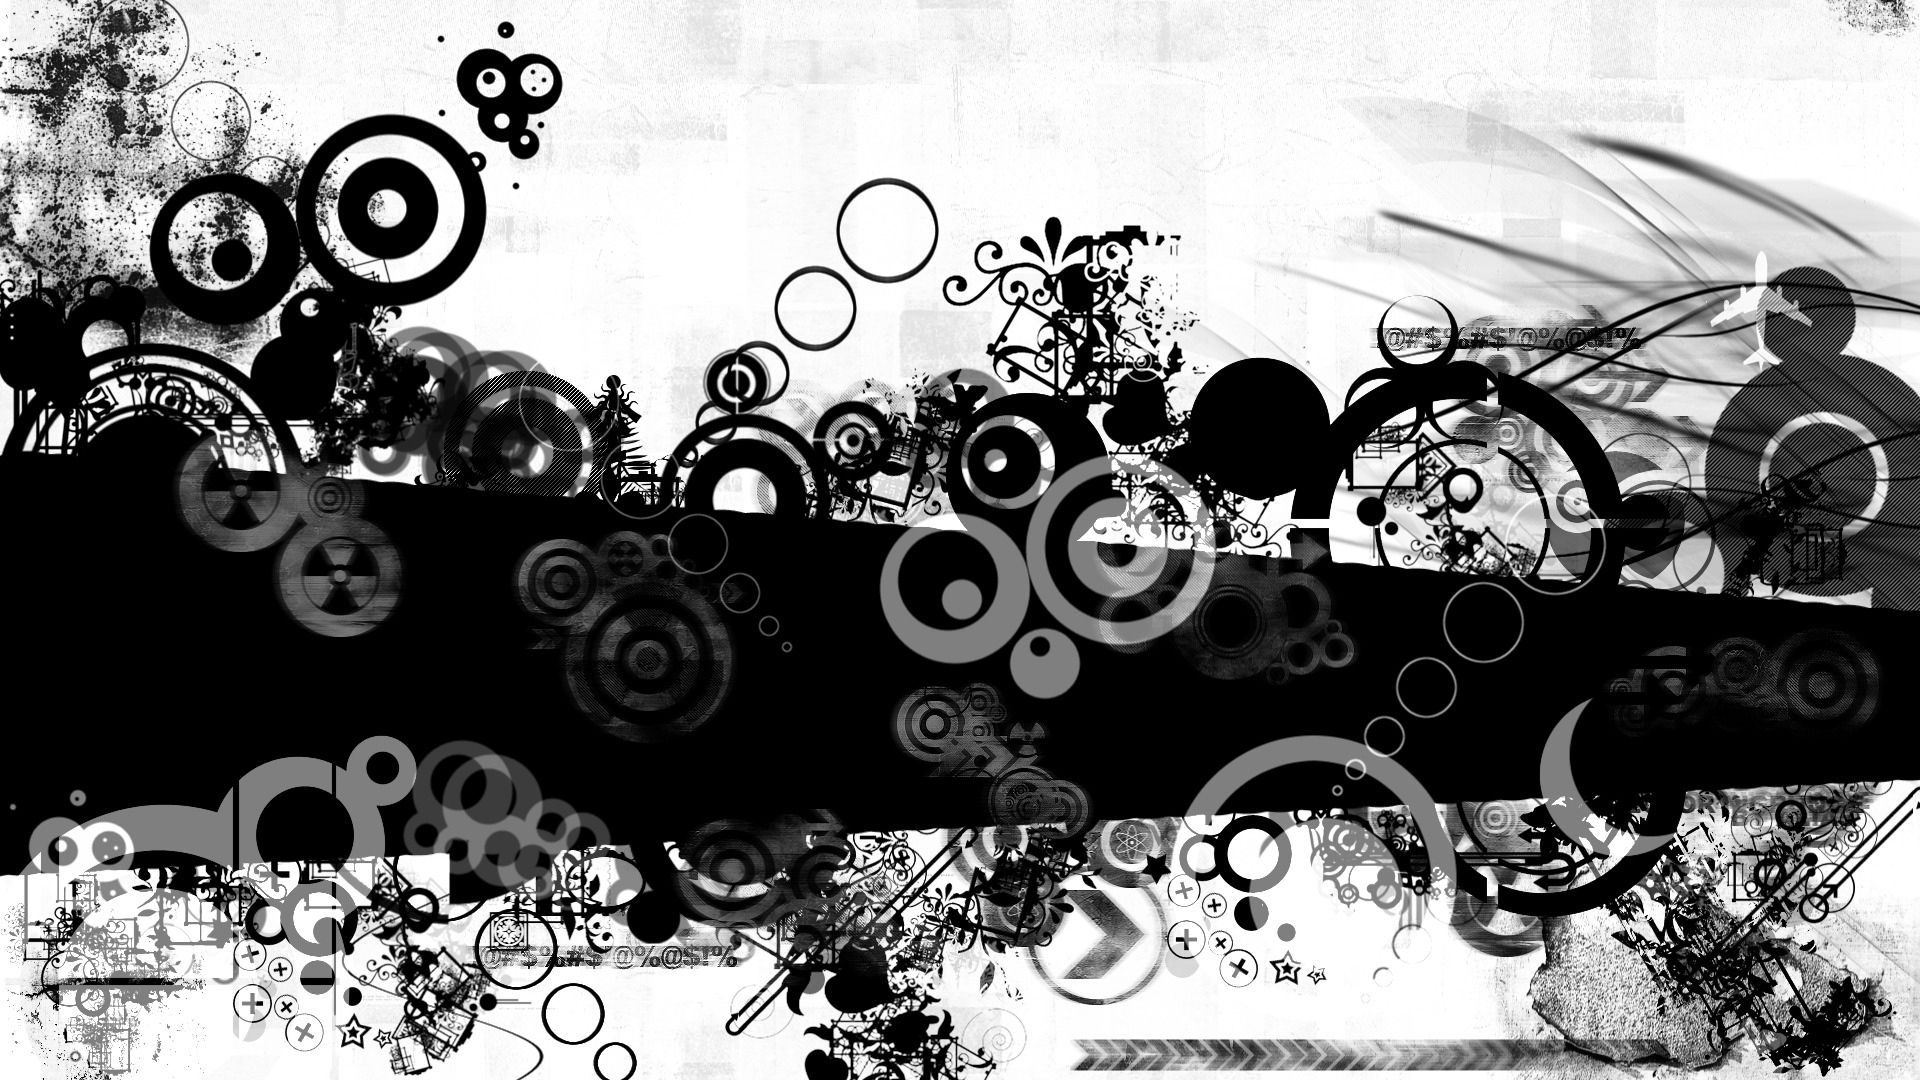 shapes, stains, vector, spots, bw, chb, shape, smeared, lubricated wallpaper for mobile